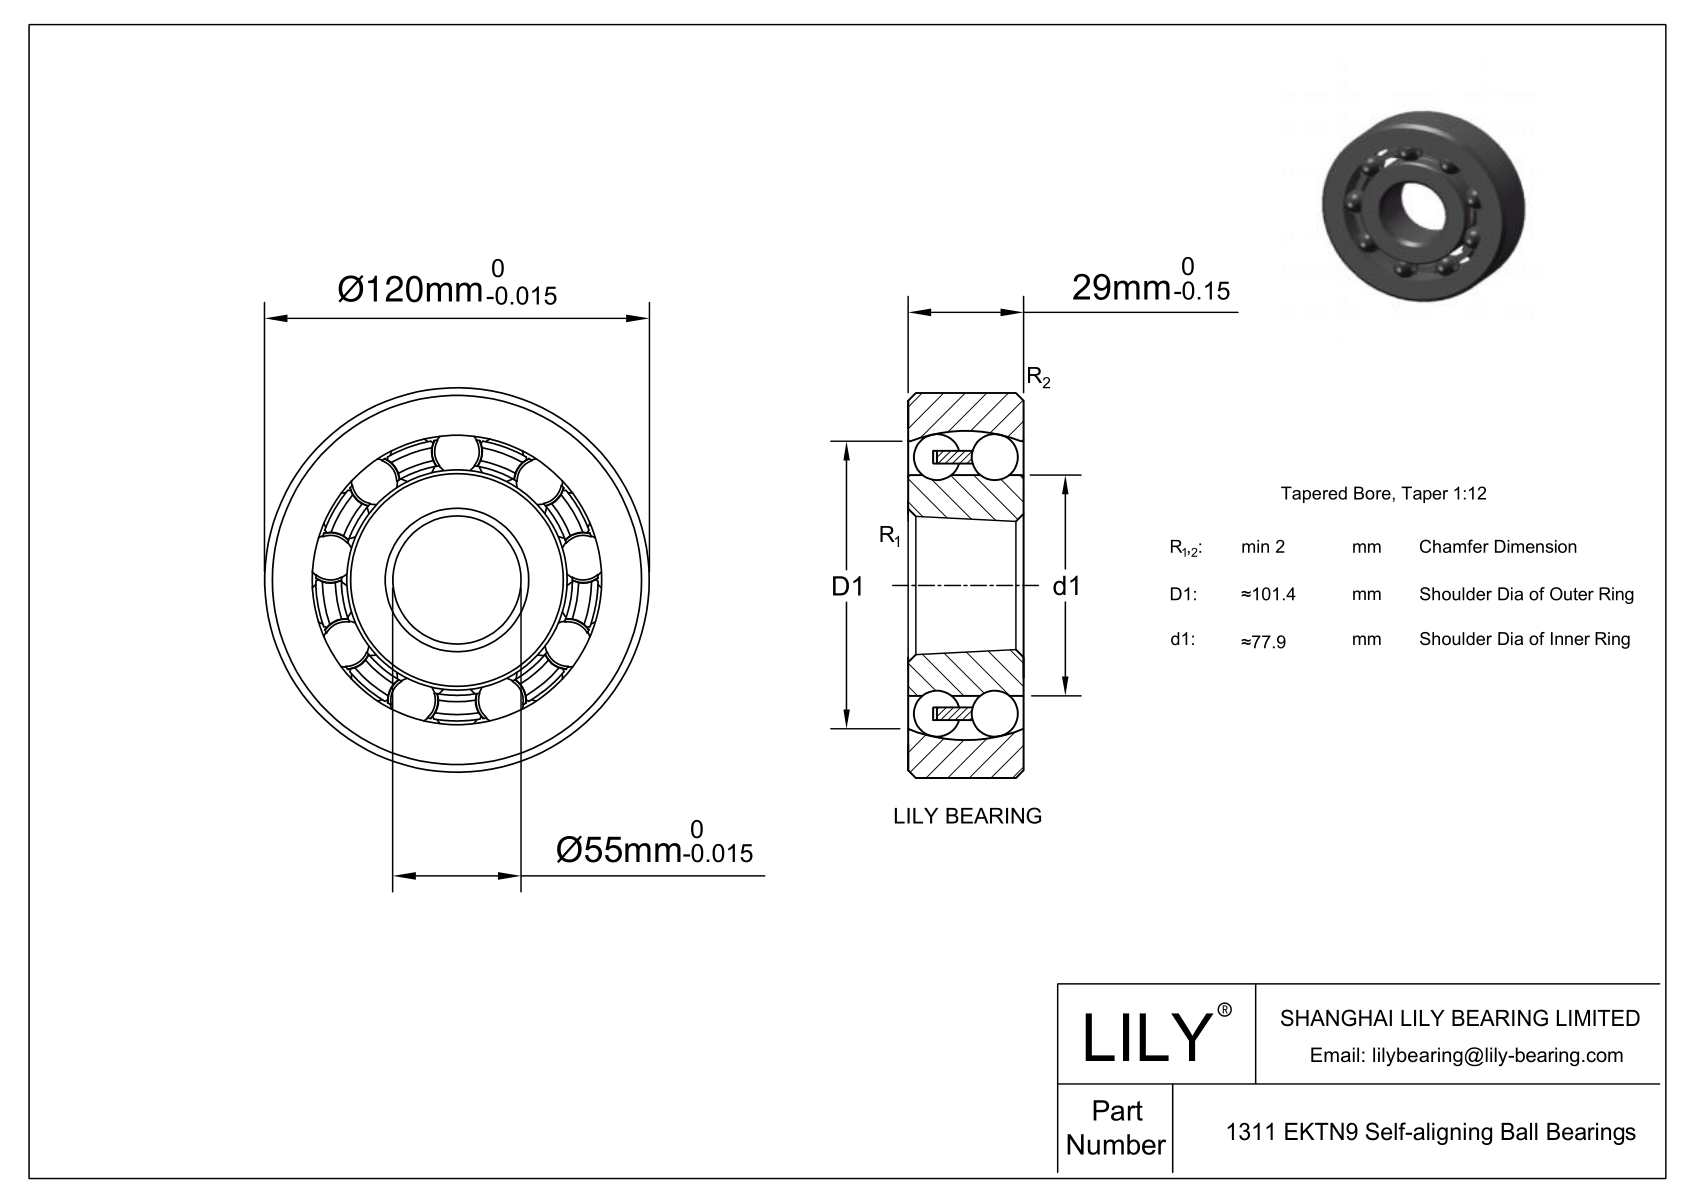 CE1311SI Silicon Nitride Self Aligning Ball Bearings cad drawing